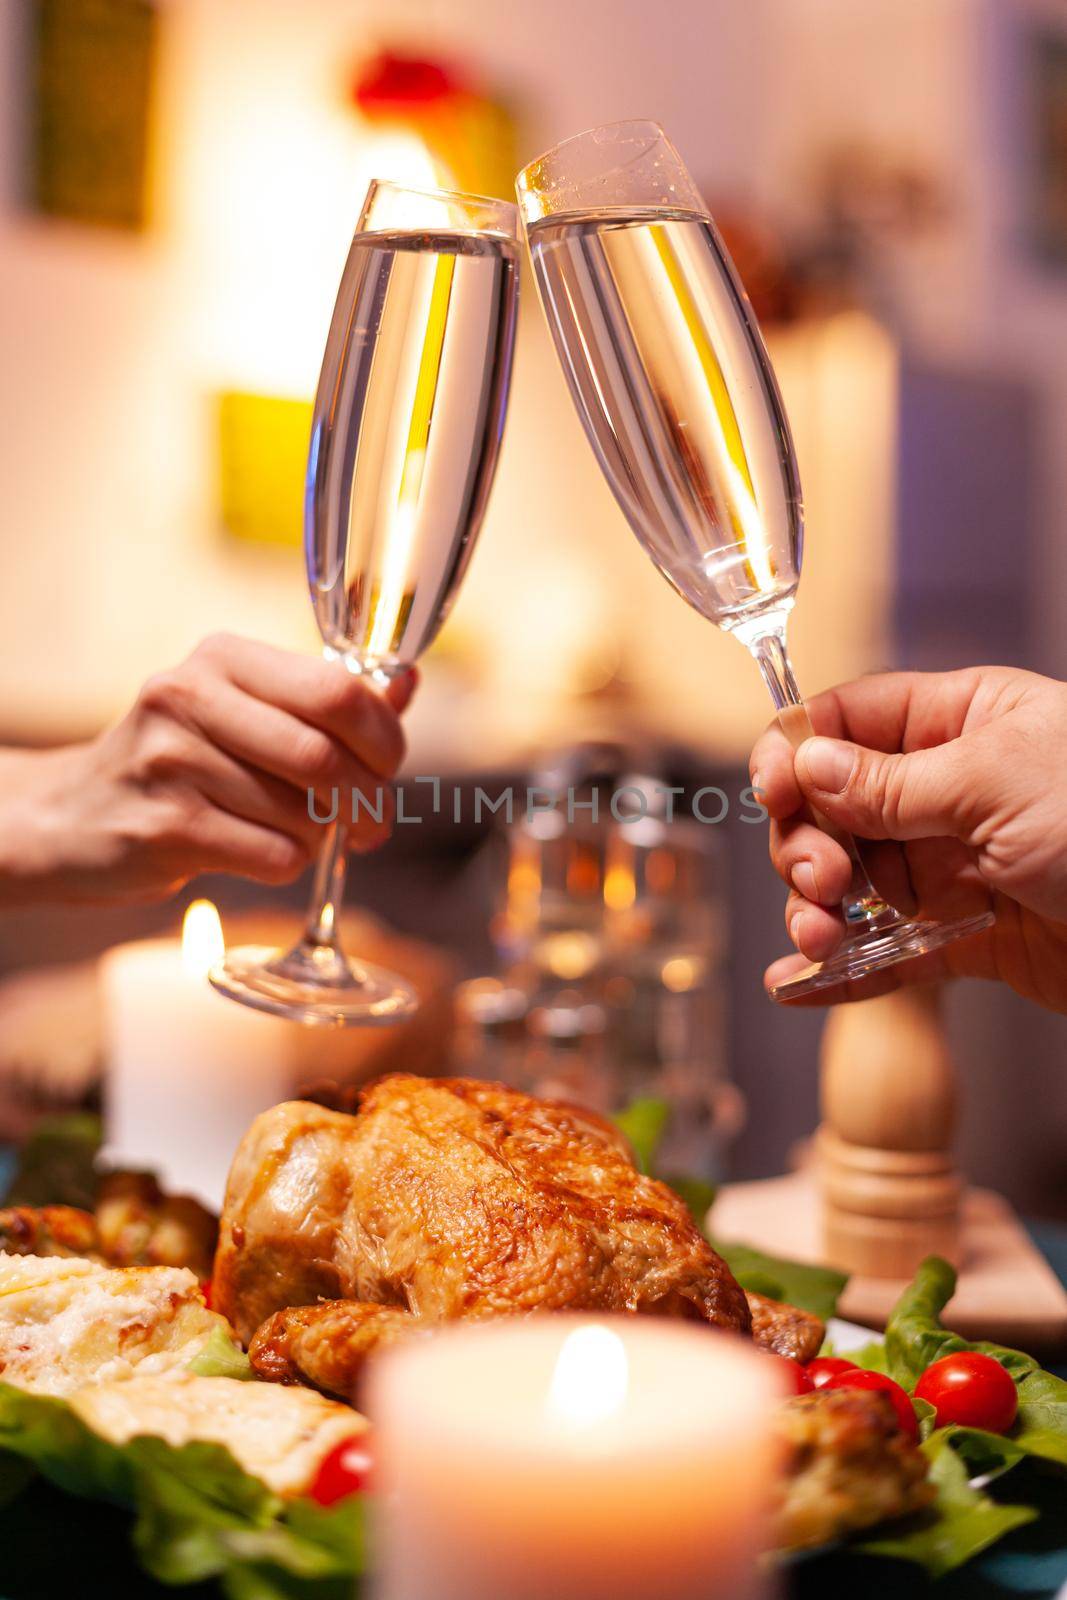 Closeup of couple hands clinking glass of wine during christmas dinner sitting at dining table in xmas decorated kitchen. Happy romantic family celebrating christmas holiday together